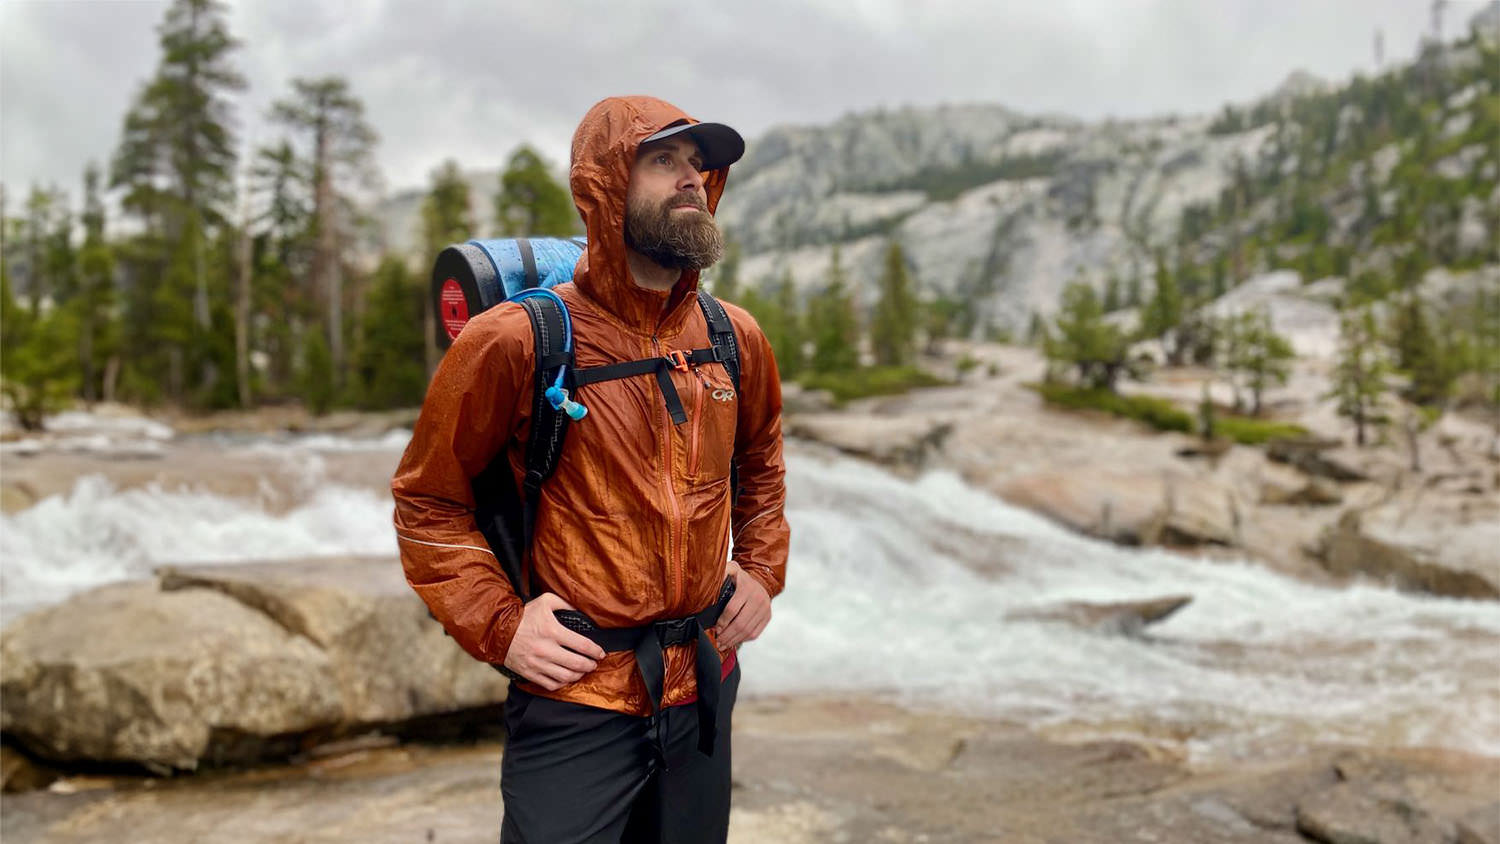 Hiking In The Rain: 5 Tips To Stay Dry & Comfortable Story